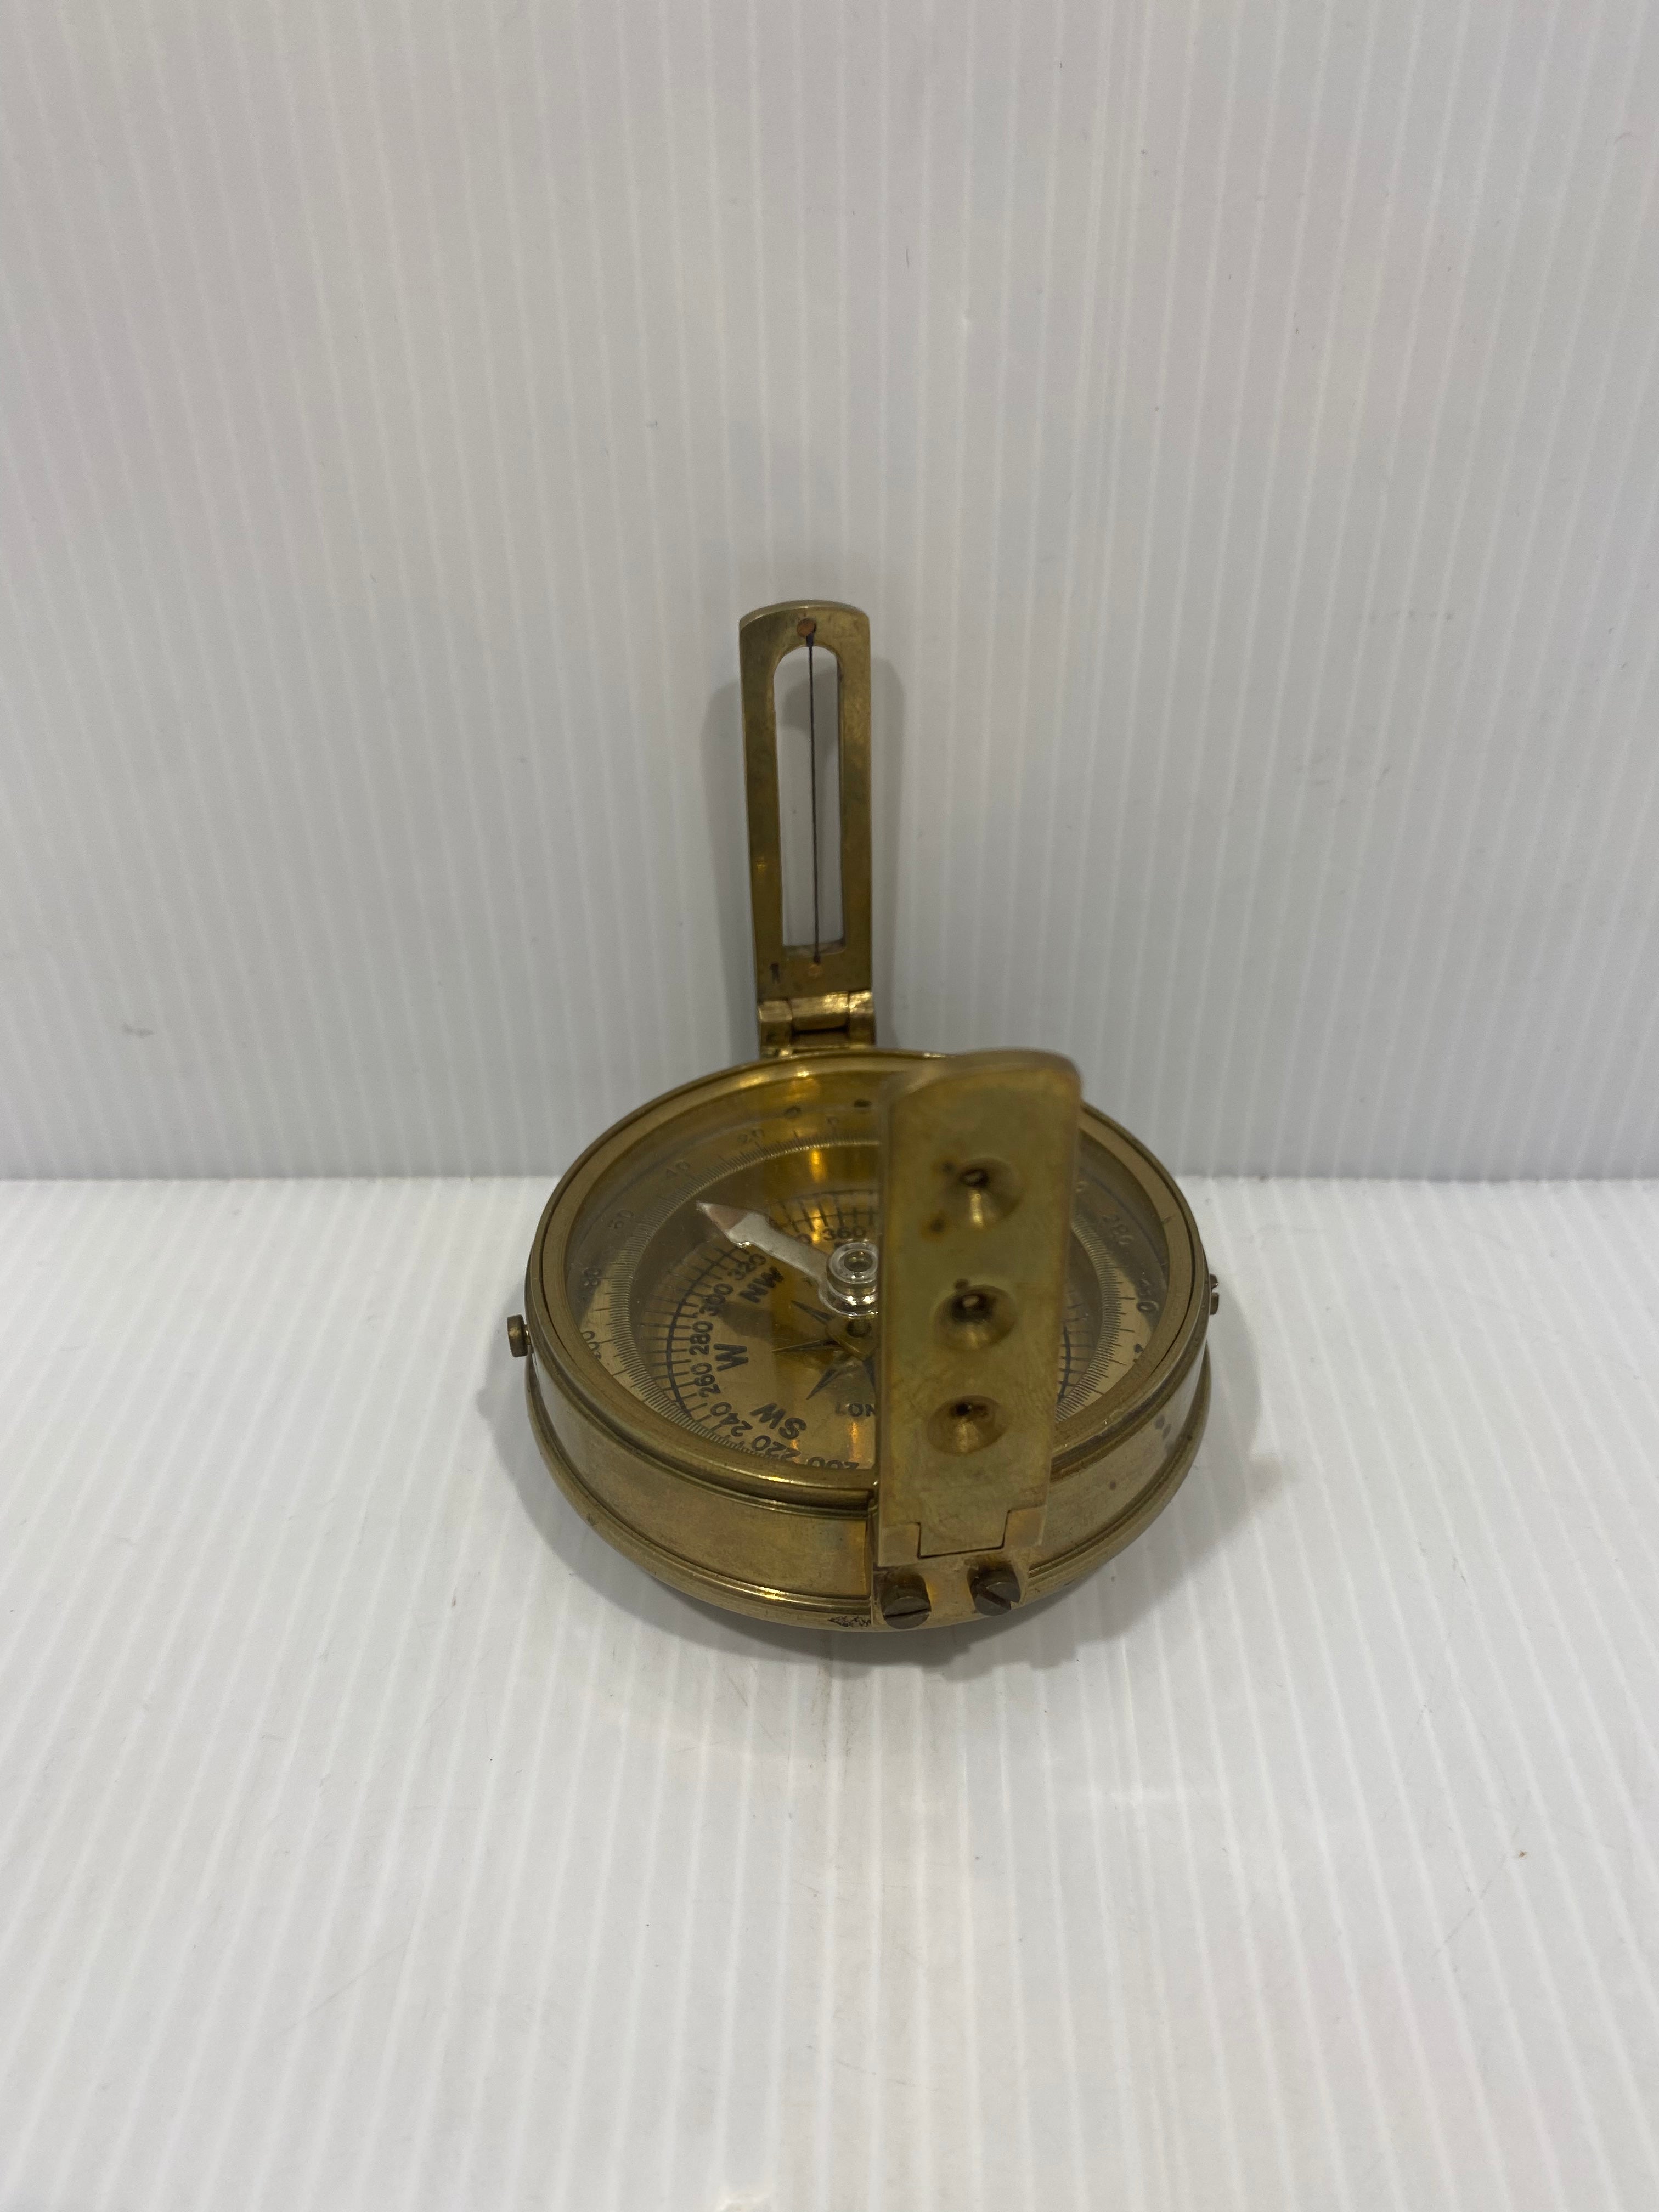 Antique Brass compass. London: T. Cooke, [ca. 20th century]